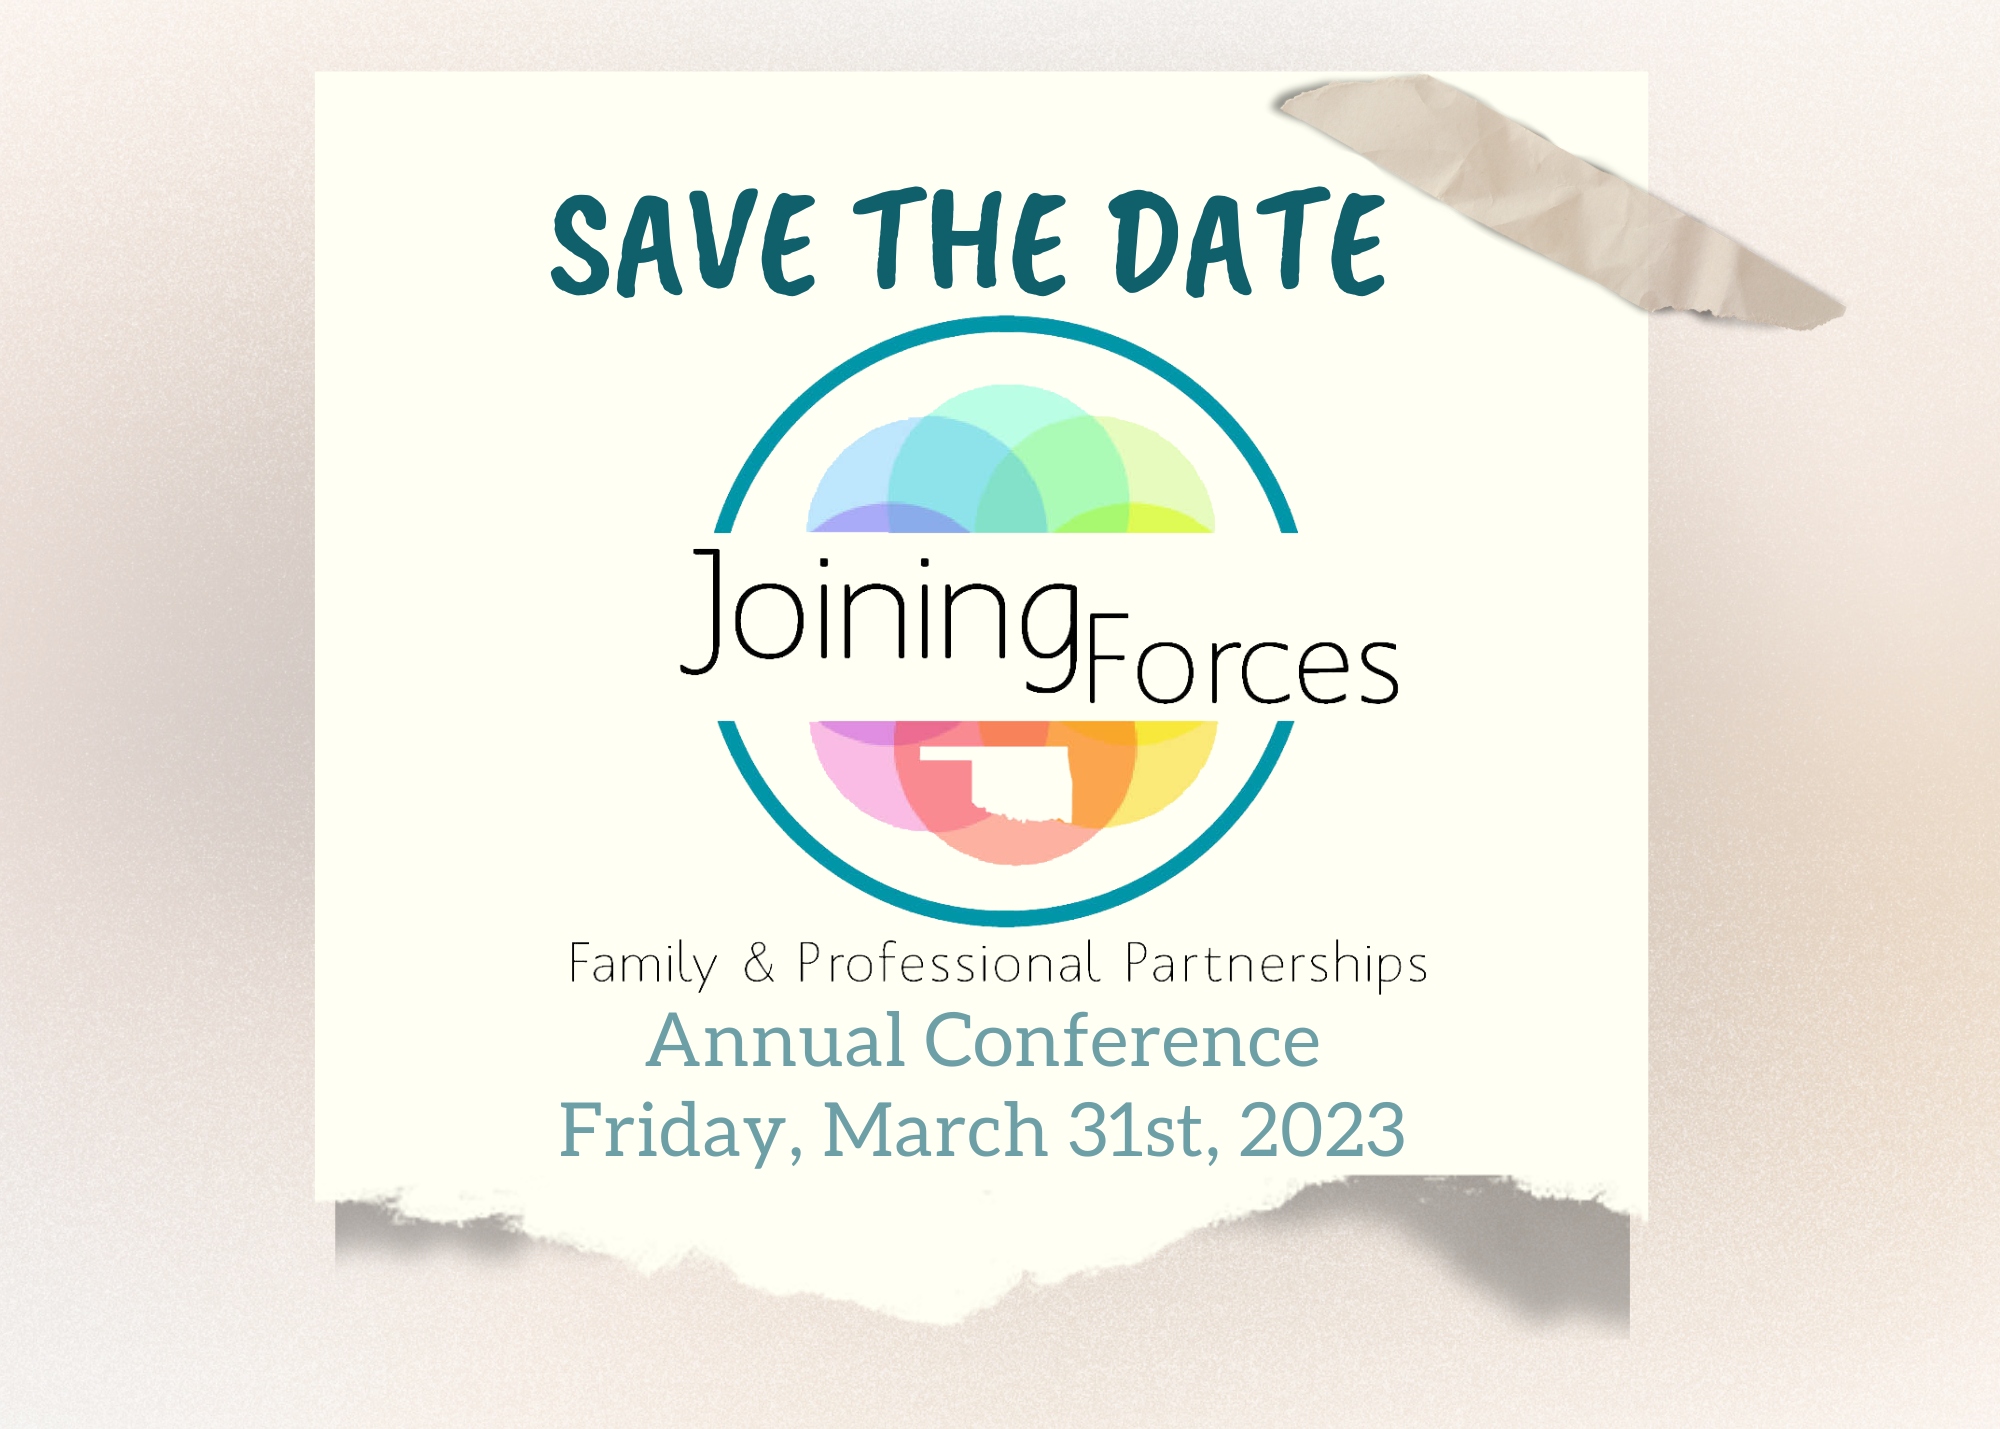 Save the Date for Joining Forces on Friday, March 31st 2023